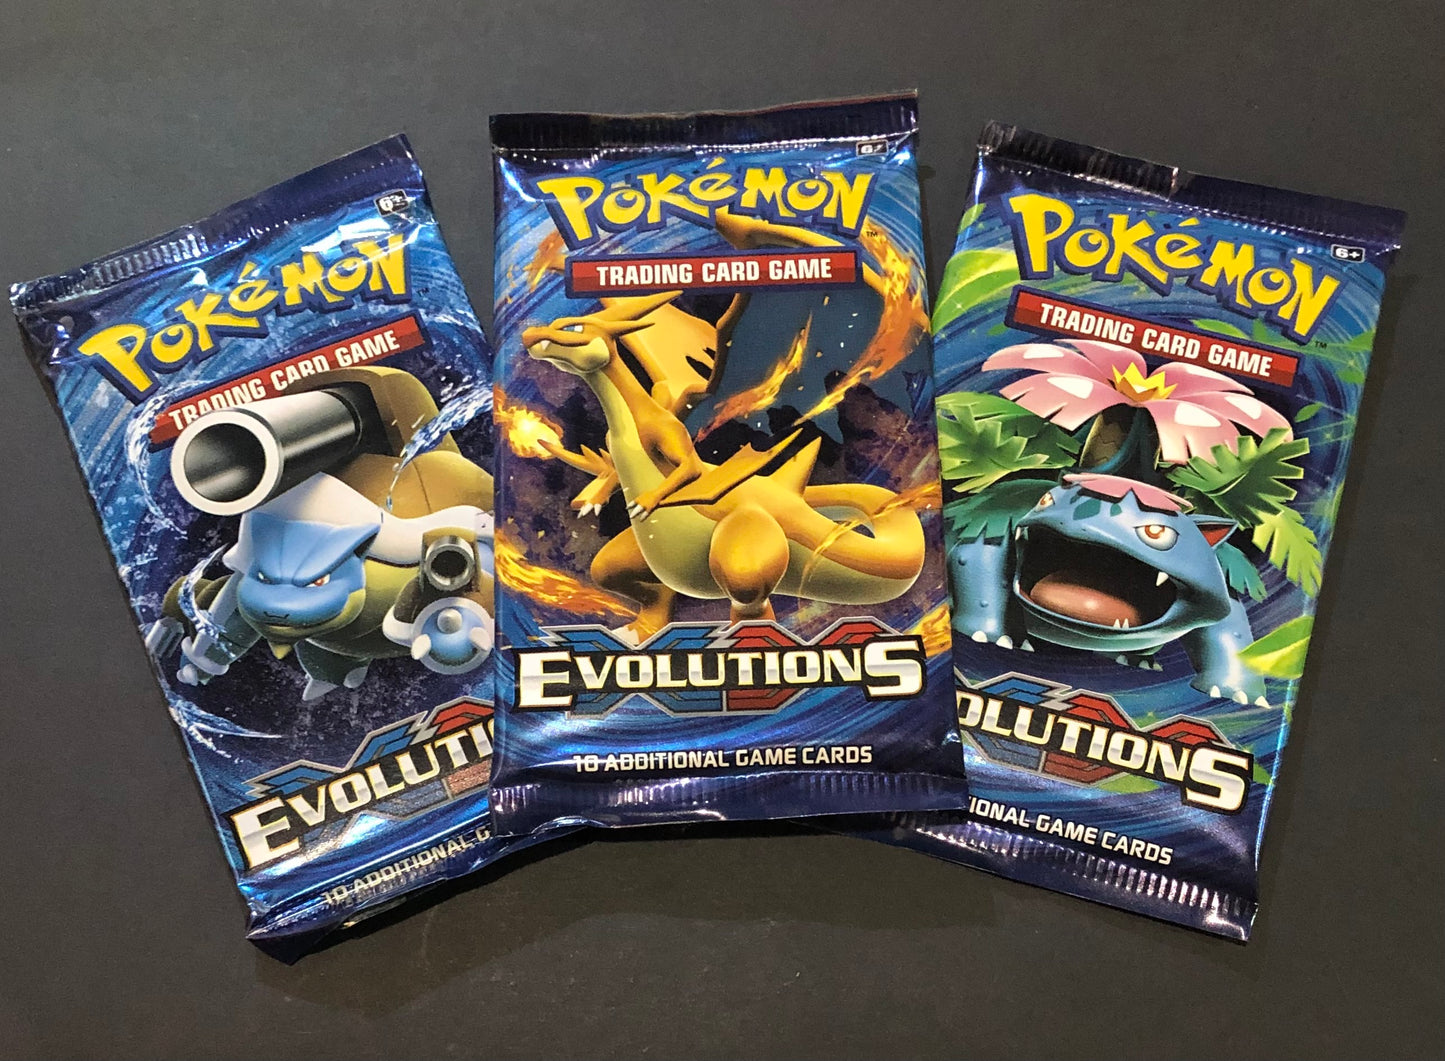 Pokémon TCG: XY: Evolutions Booster Pack: 3 Pack